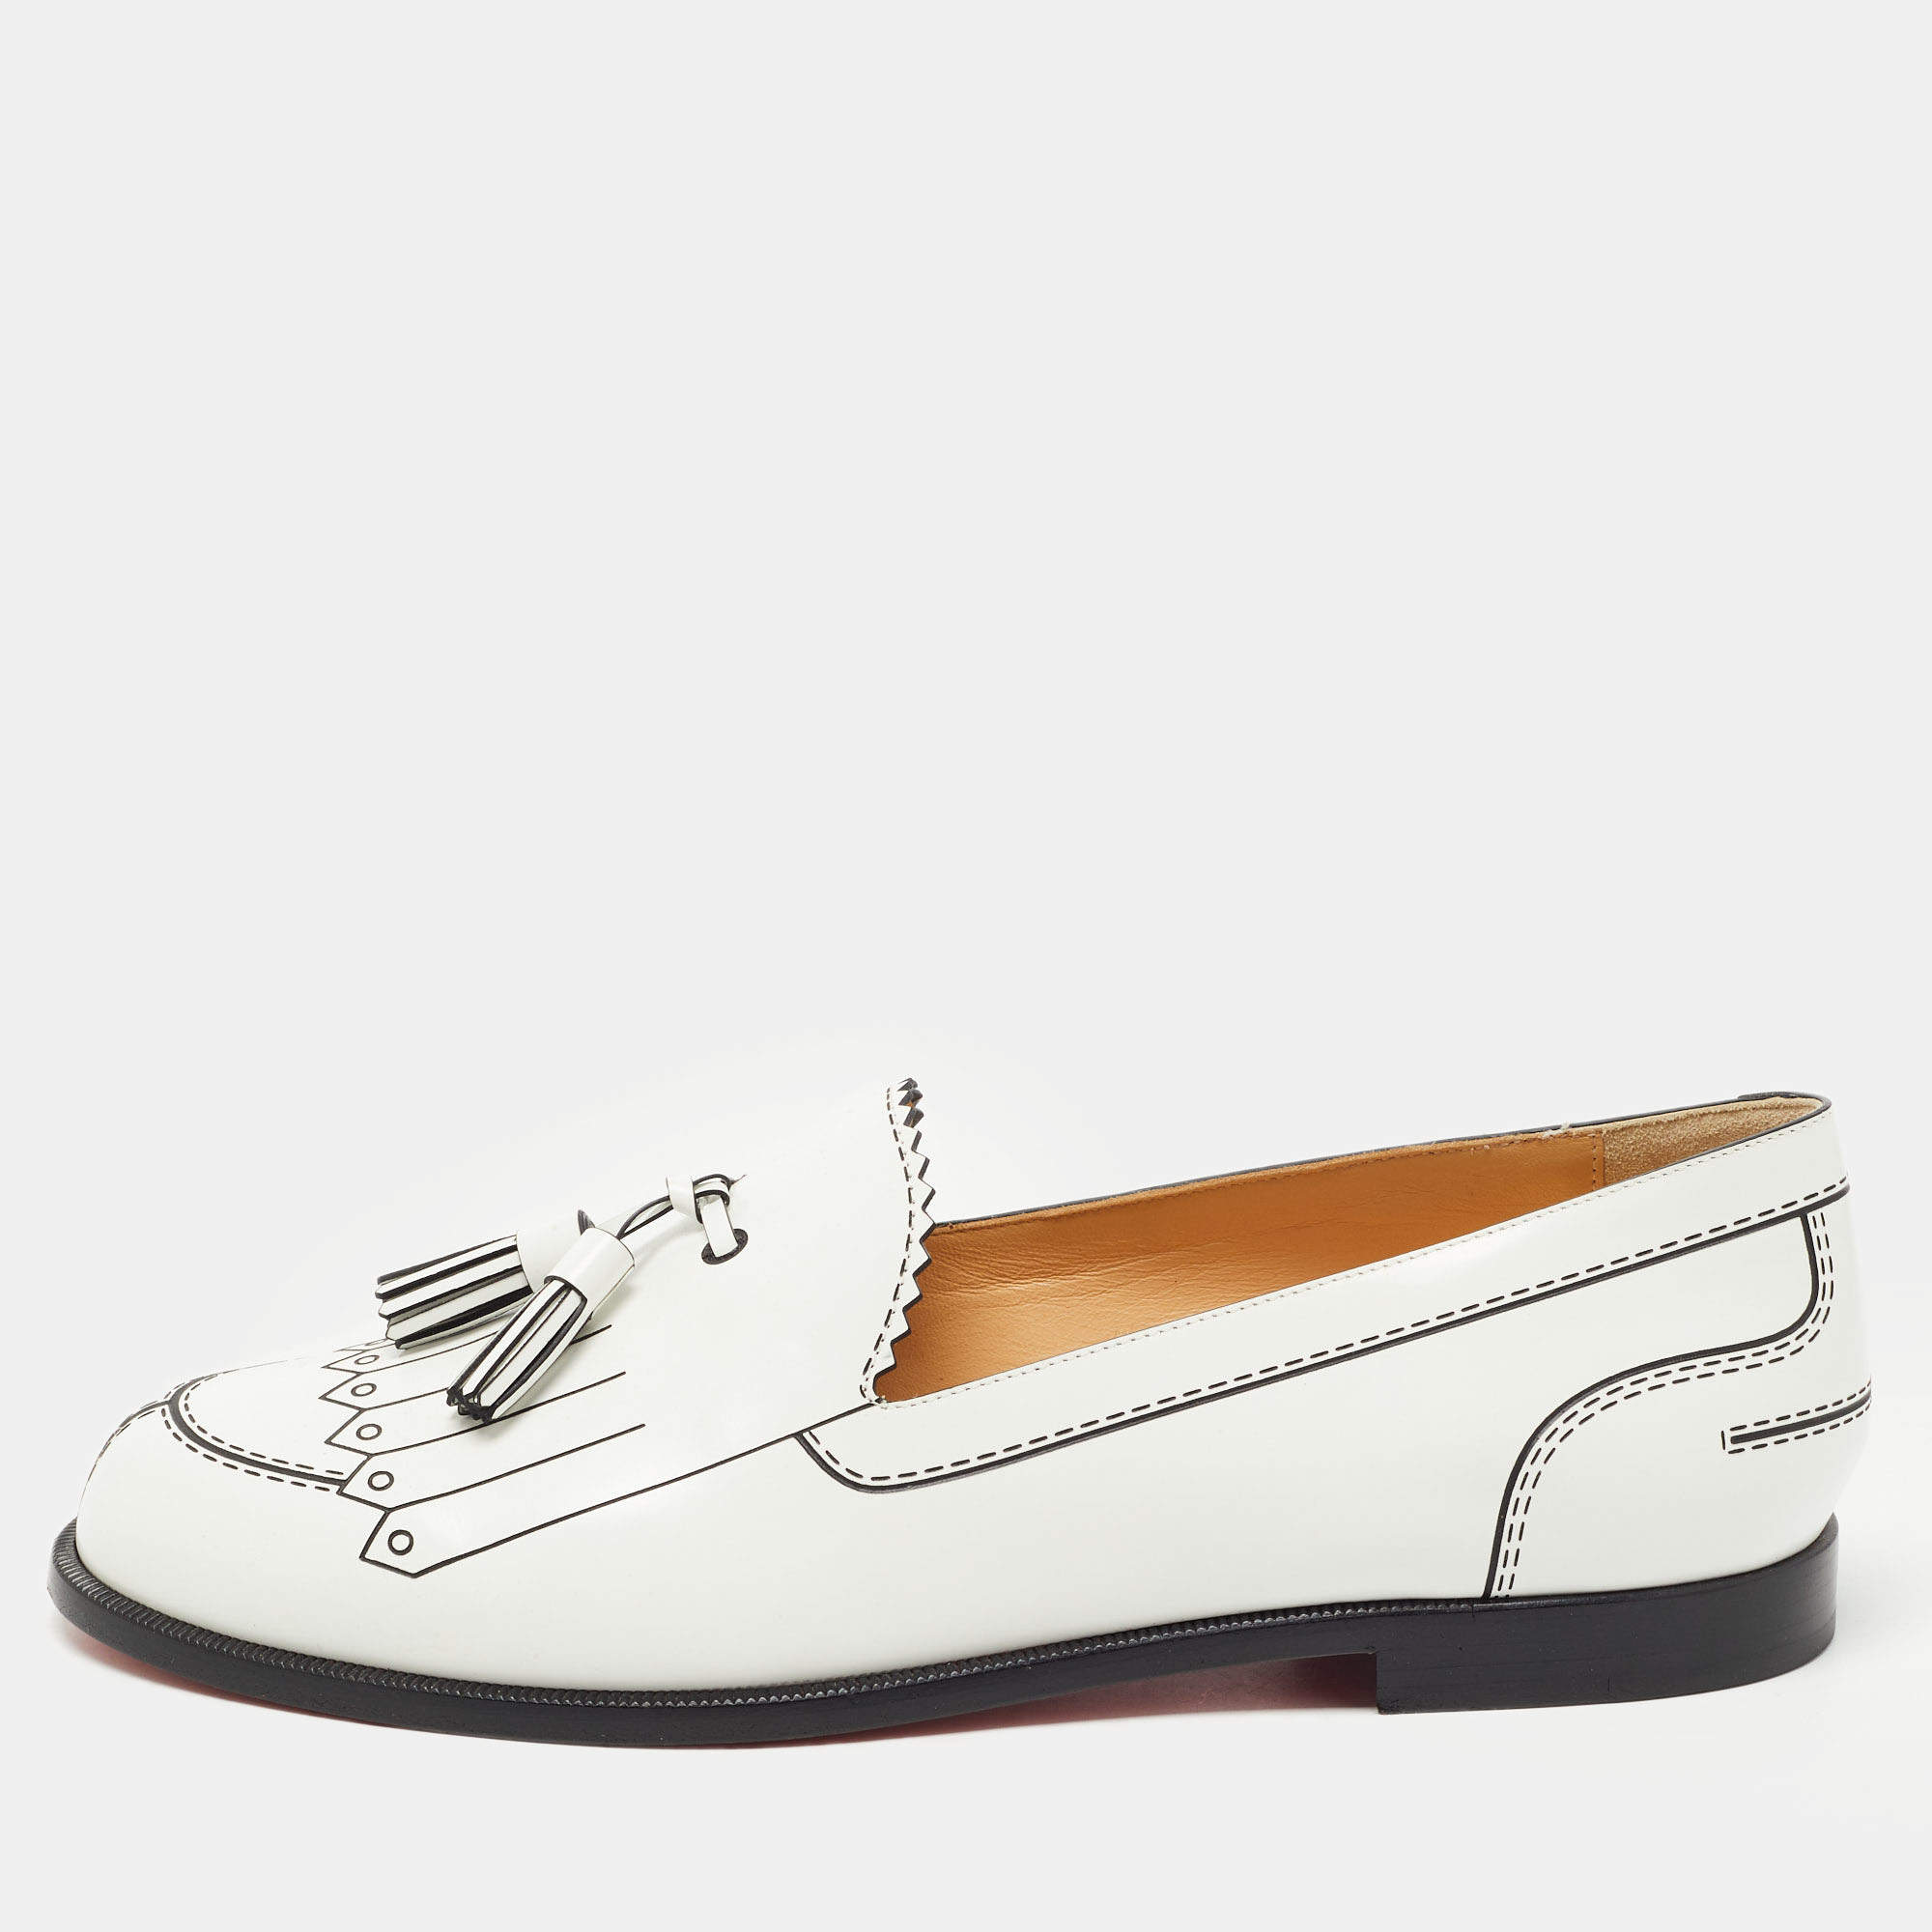 Mission Modtagelig for Industriel Christian Louboutin White/Black Leather Trompinetta Loafers Size 38.5 Christian  Louboutin | TLC